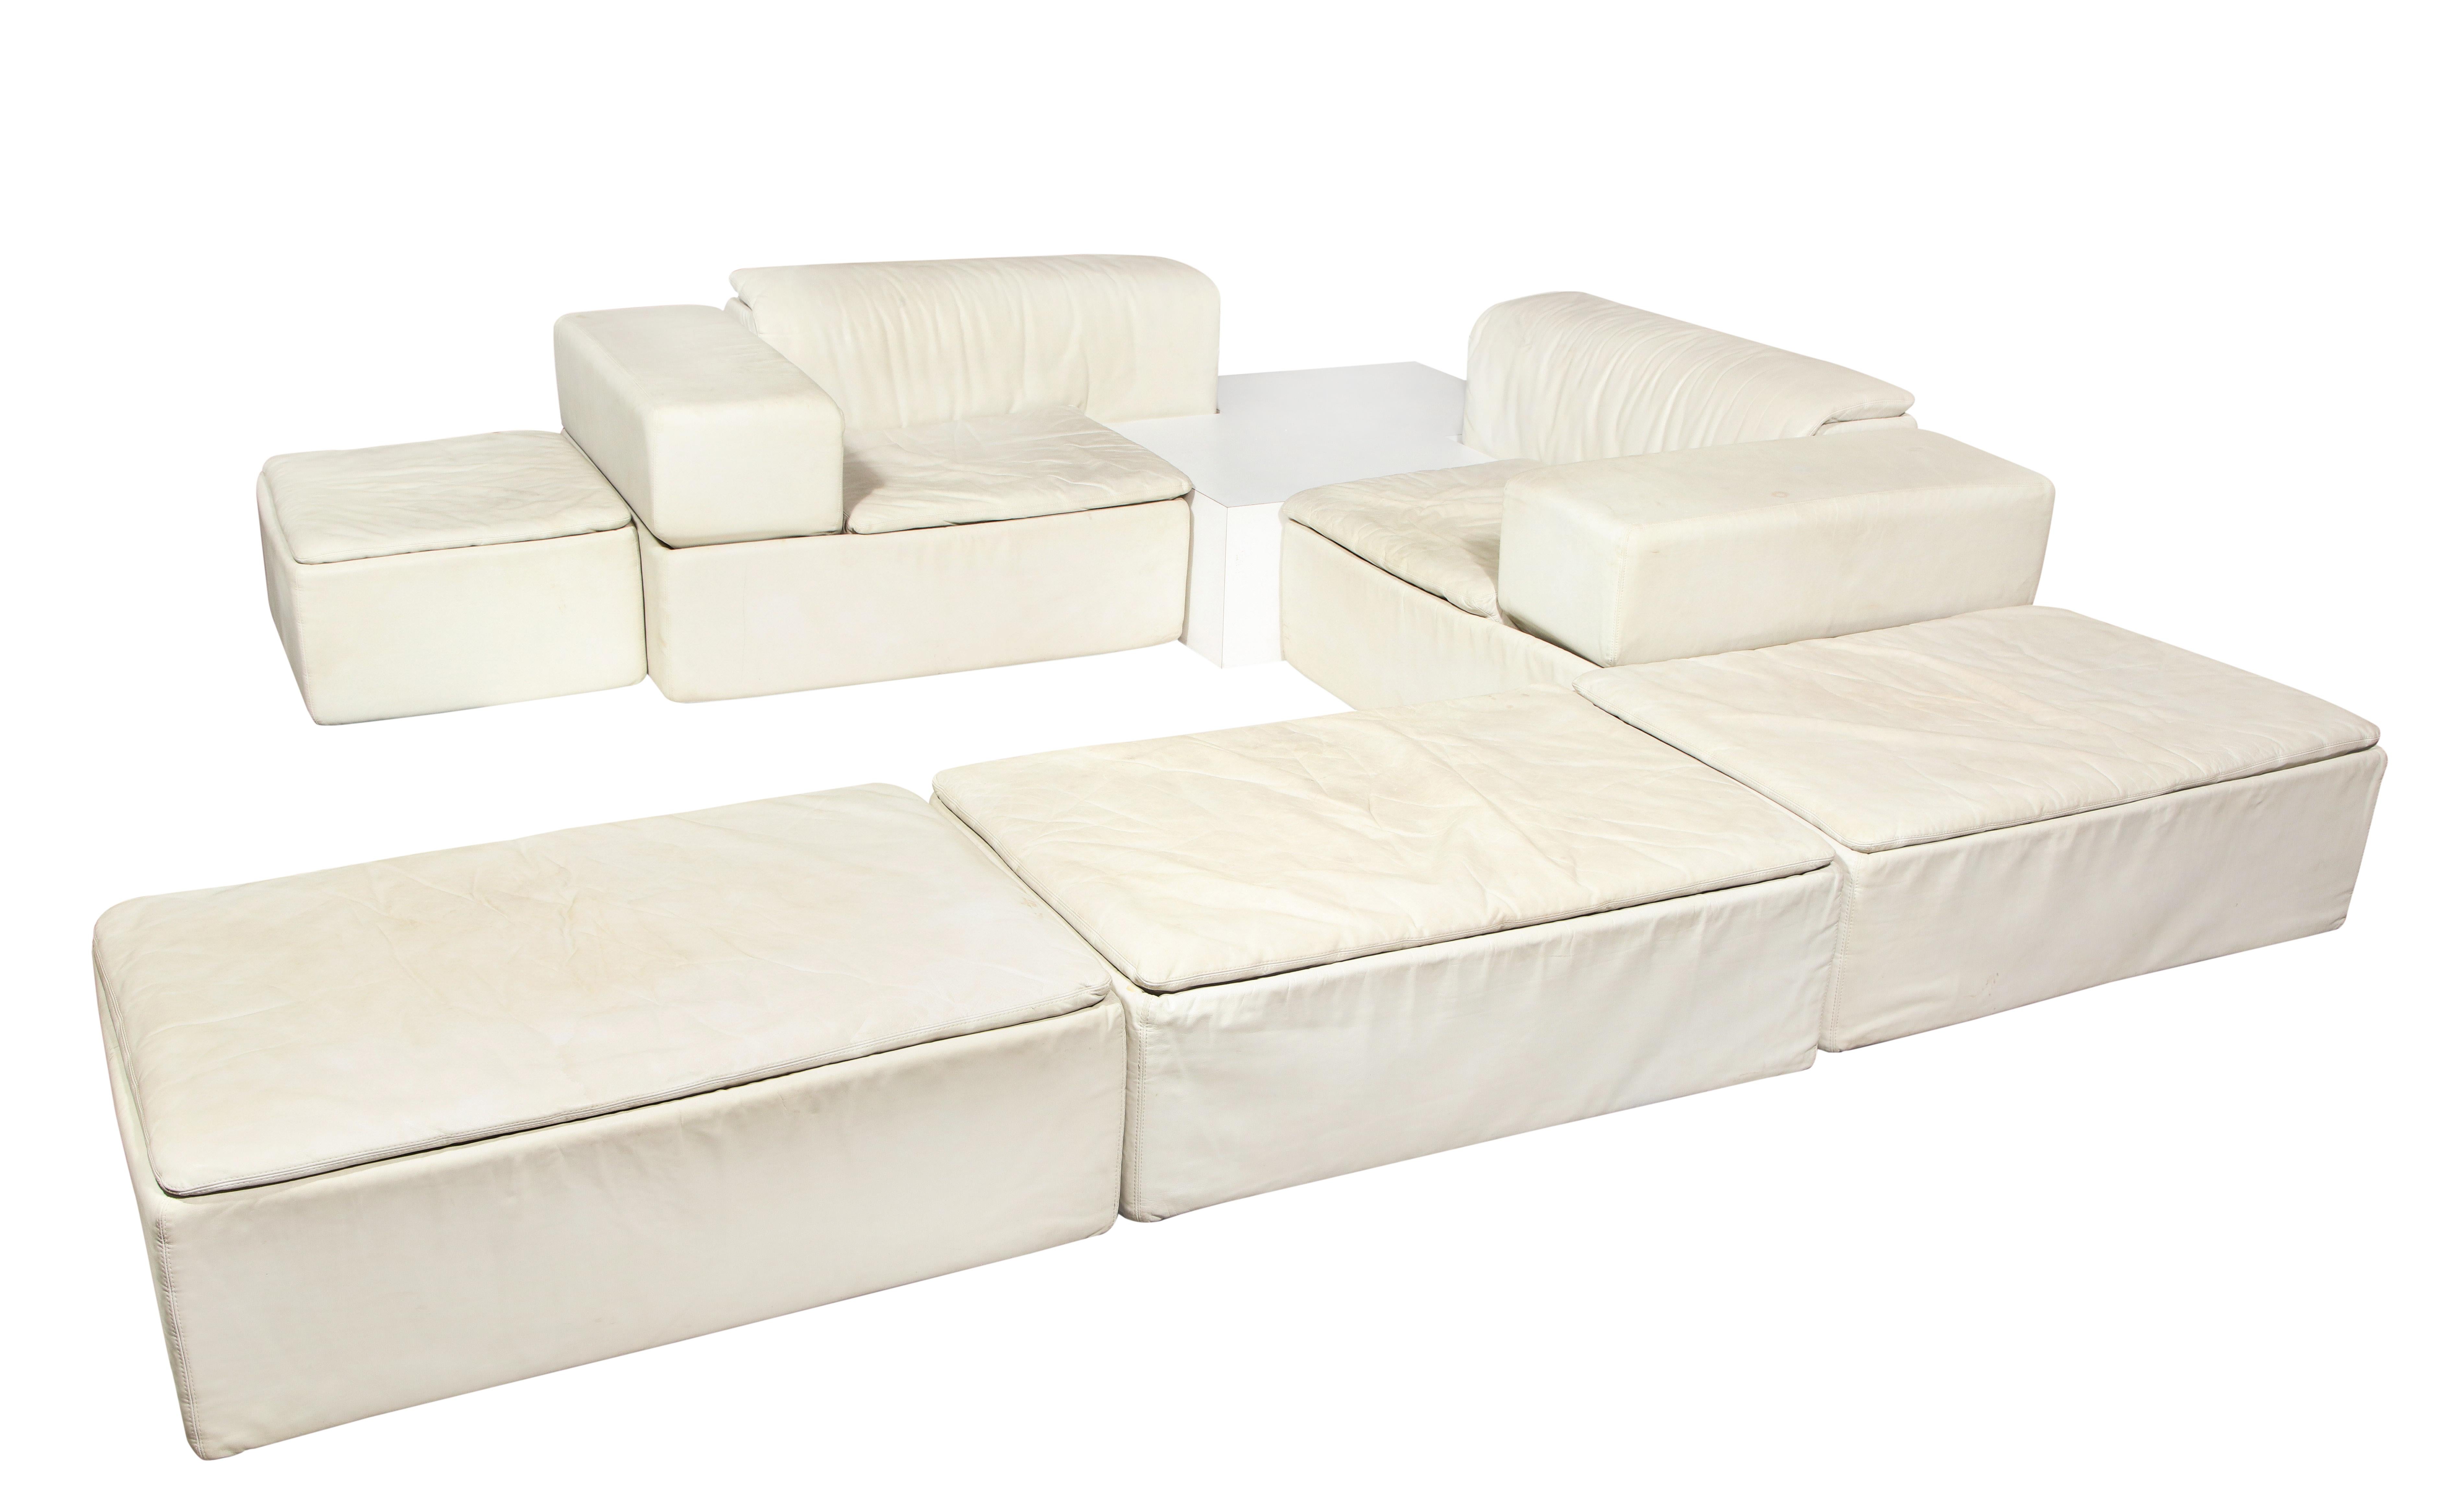 Sormani, Claudio Salocchi palone modular white leather sectional sofa, Italy, 1970s

Very rare seven piece sectional in very good condition. Can be configured in multiple ways, but below shows all seven pieces together.
This is a one of a kind